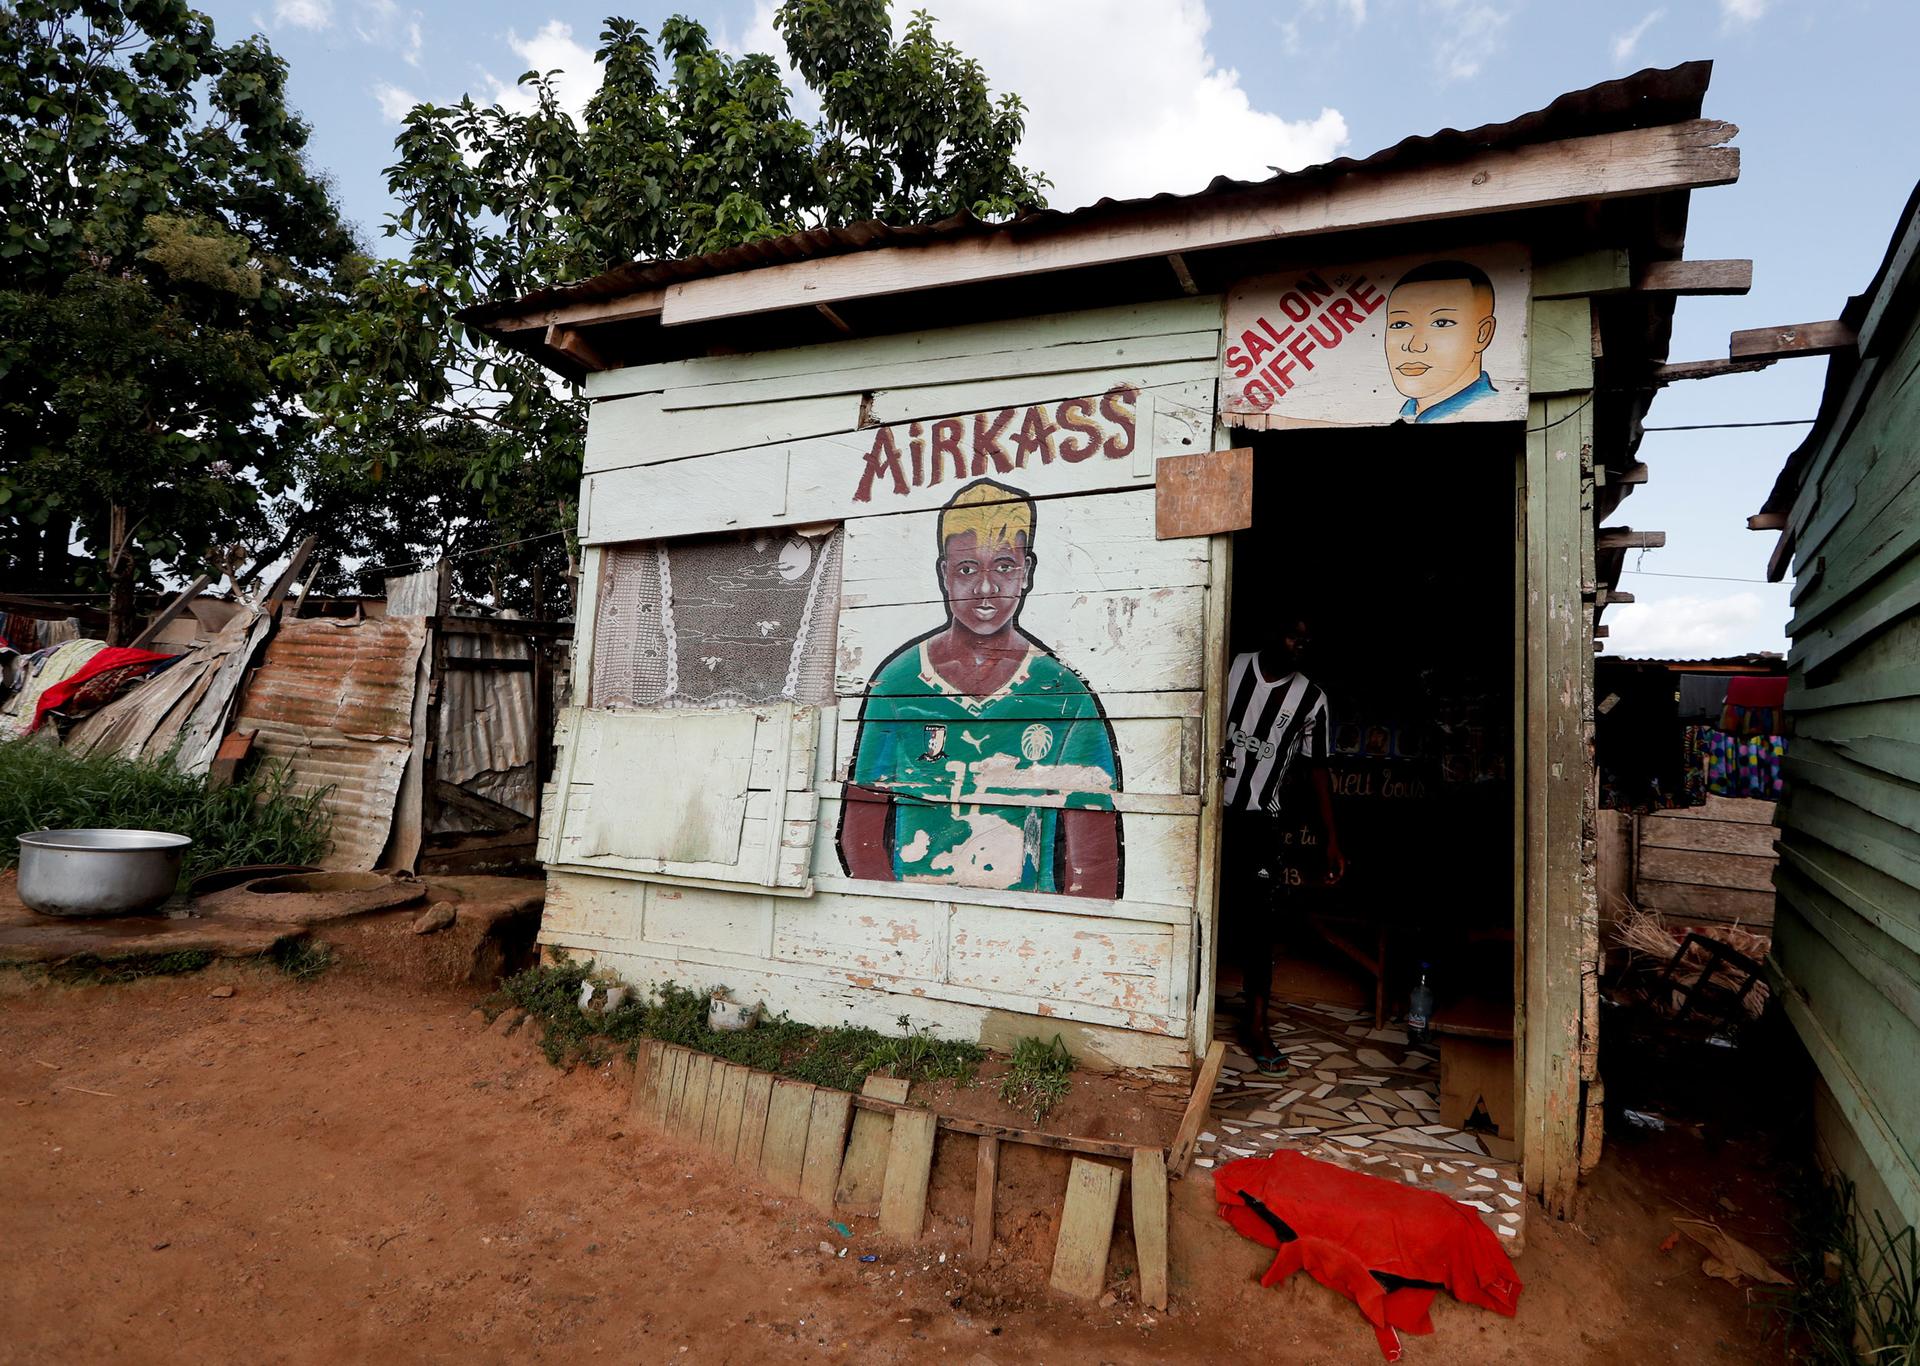 A small wooden building is shown with a painting of a soccer player on the wall.